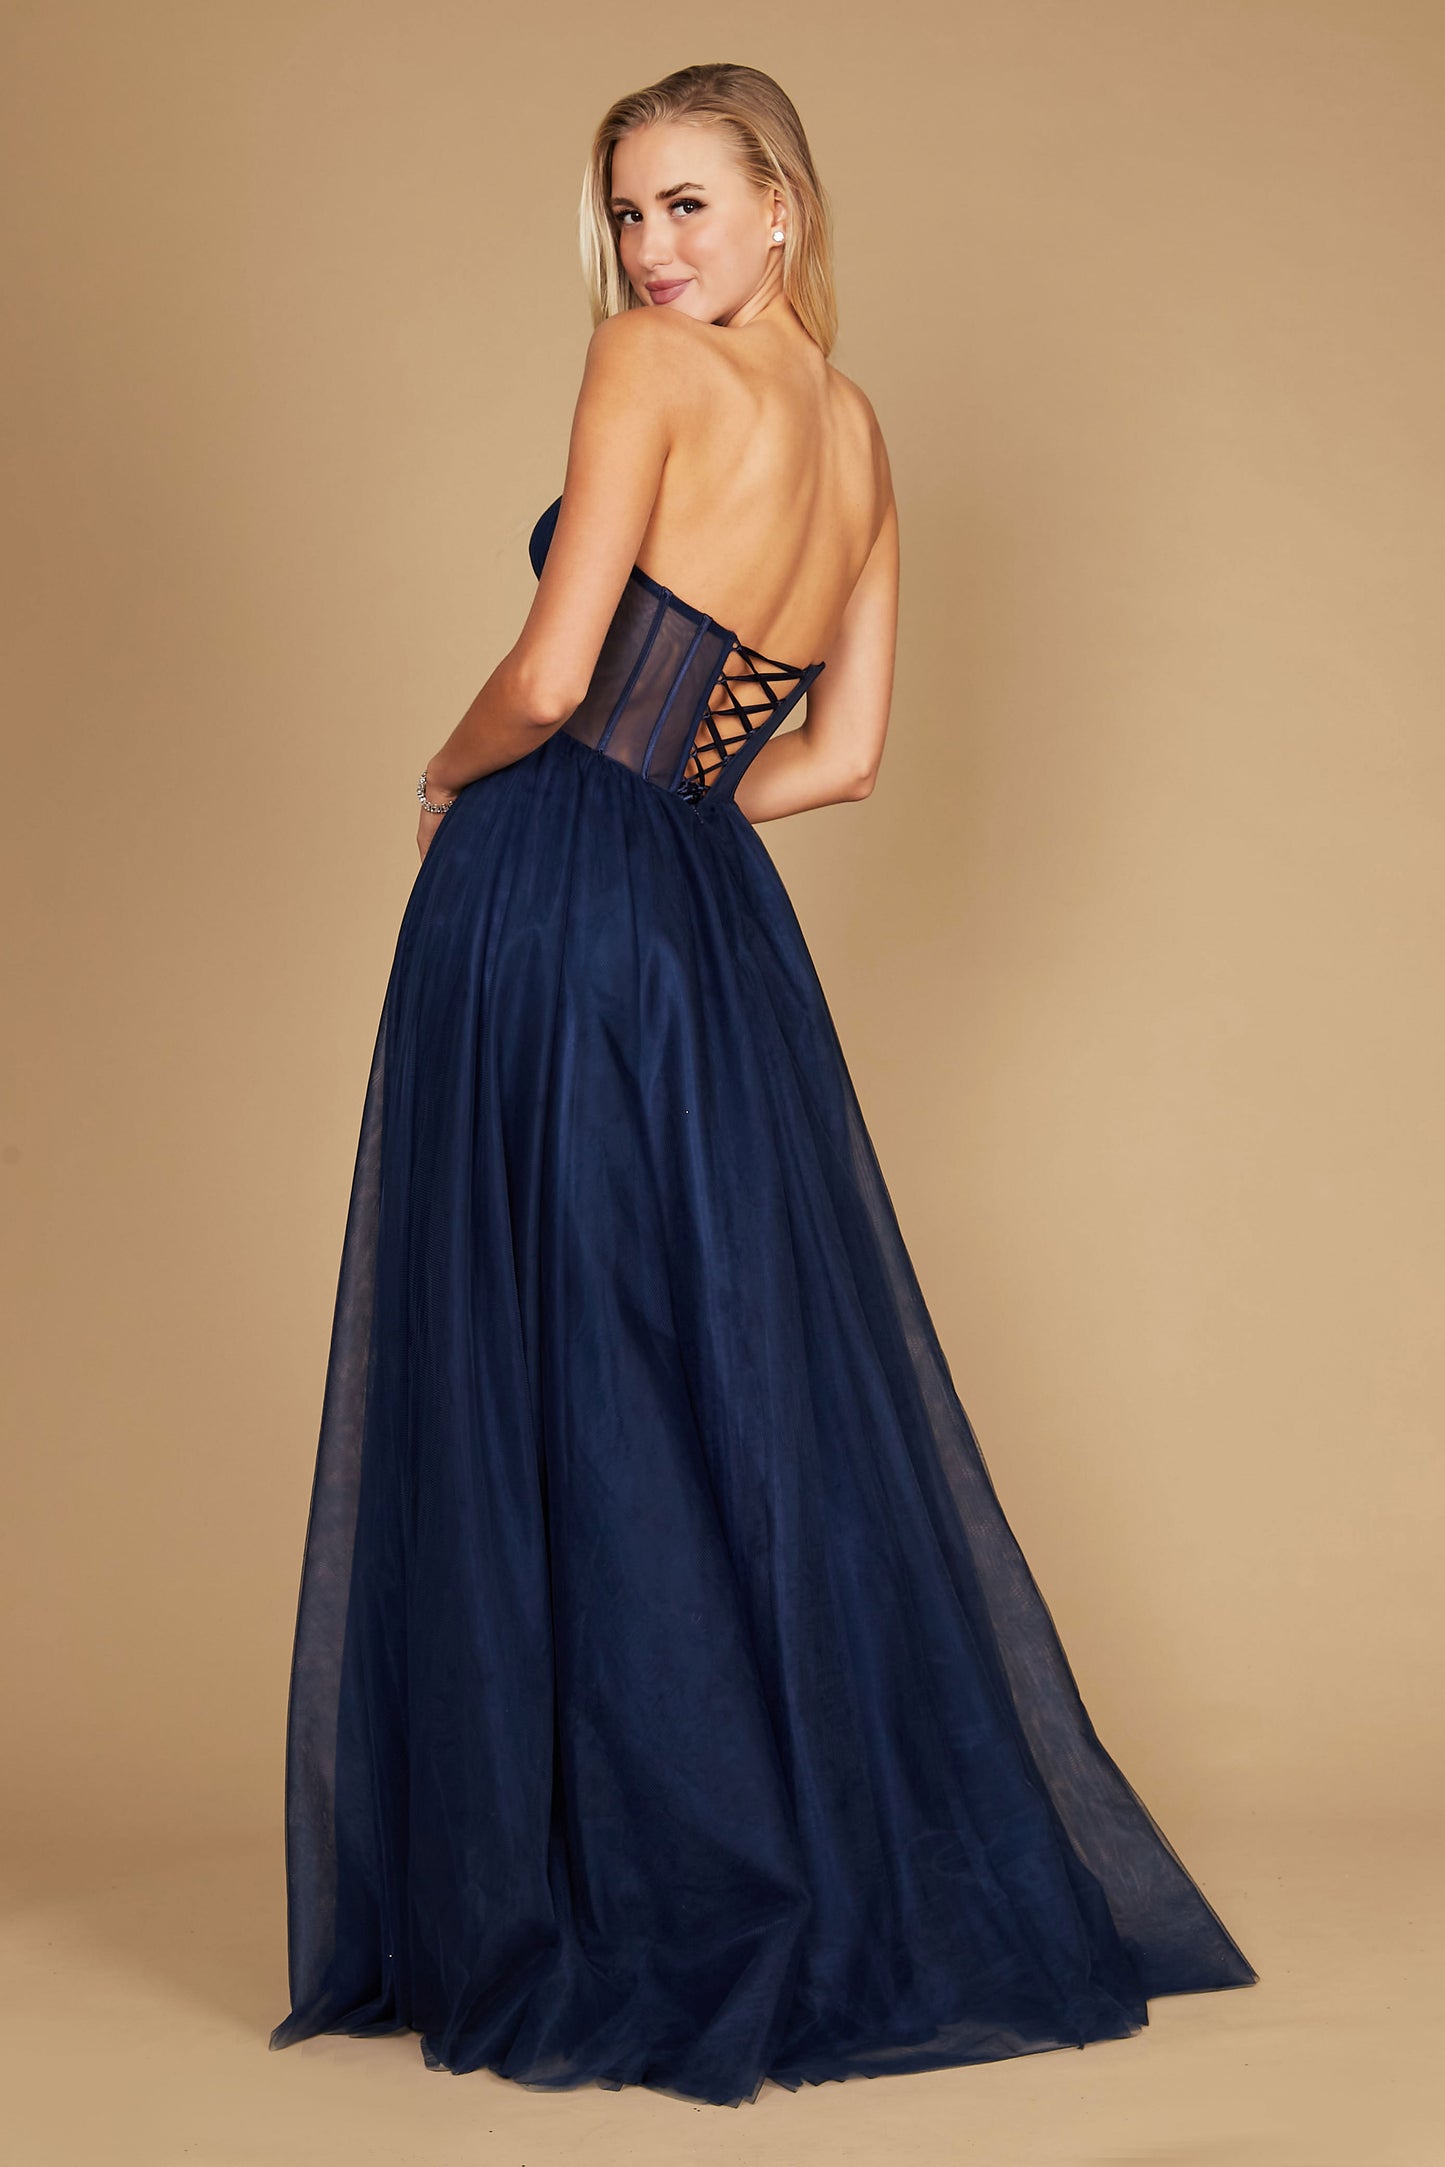 Prom Dresses Corset Prom Party Dress Formal Ball Gown Navy